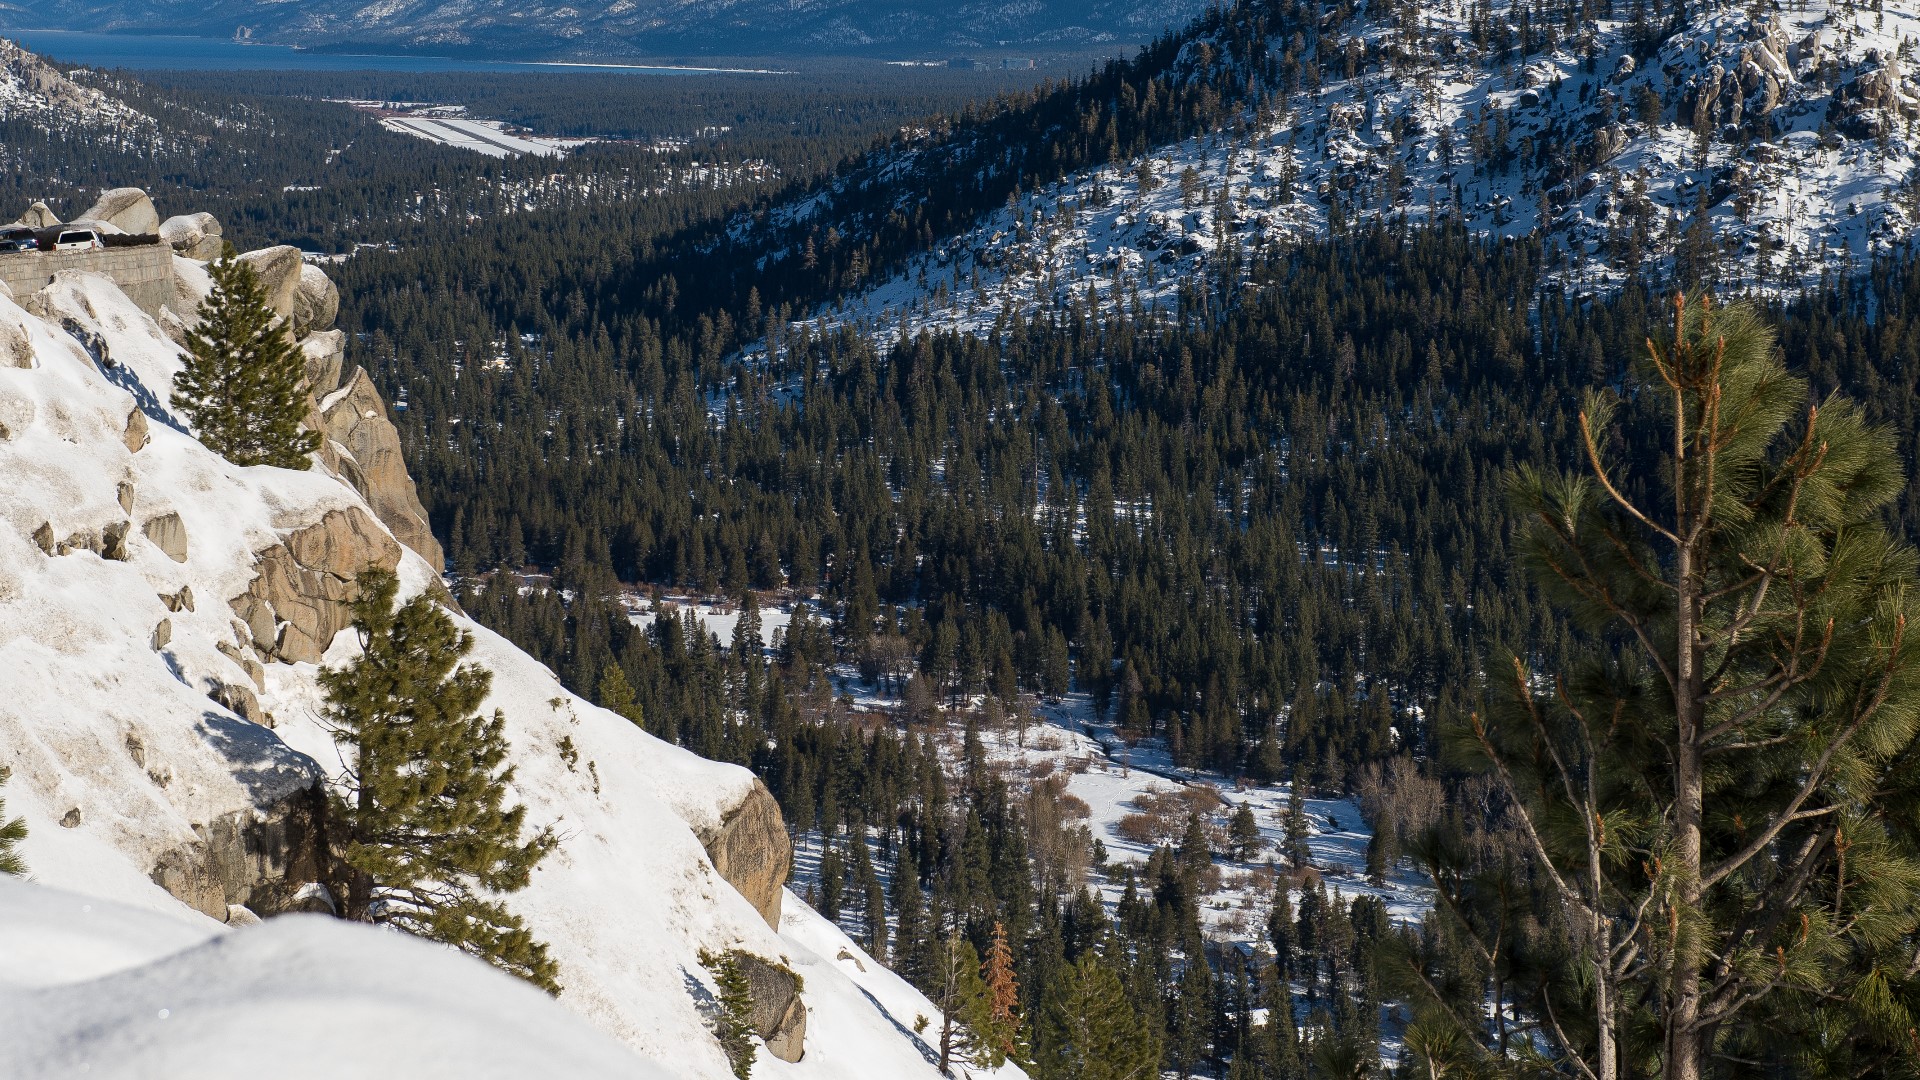 Along with sea-level rise and wildfire extremes, mountain snow loss is quickly becoming one of the top climate change issues facing the West.